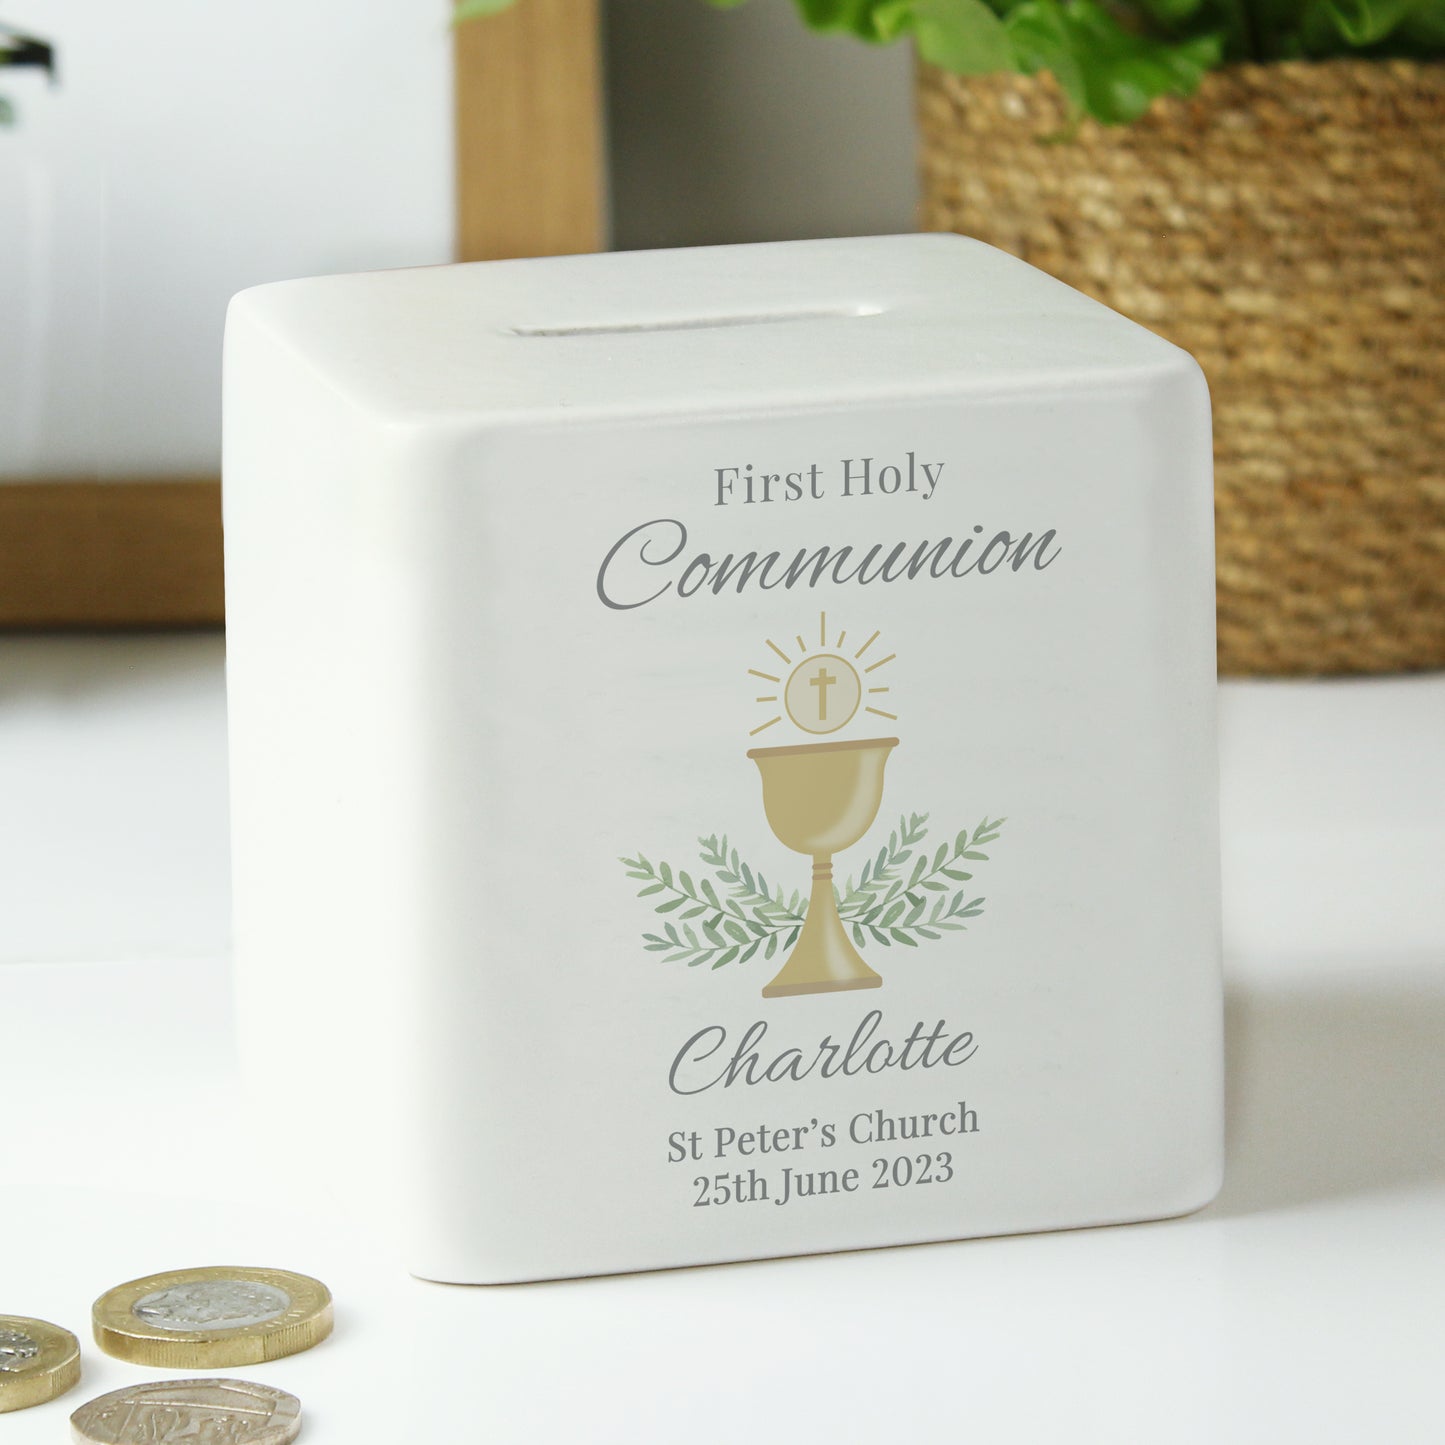 Ceramic First Holy Communion money box with pretty chalice pattern. Personalised with name and up to two further lines of text